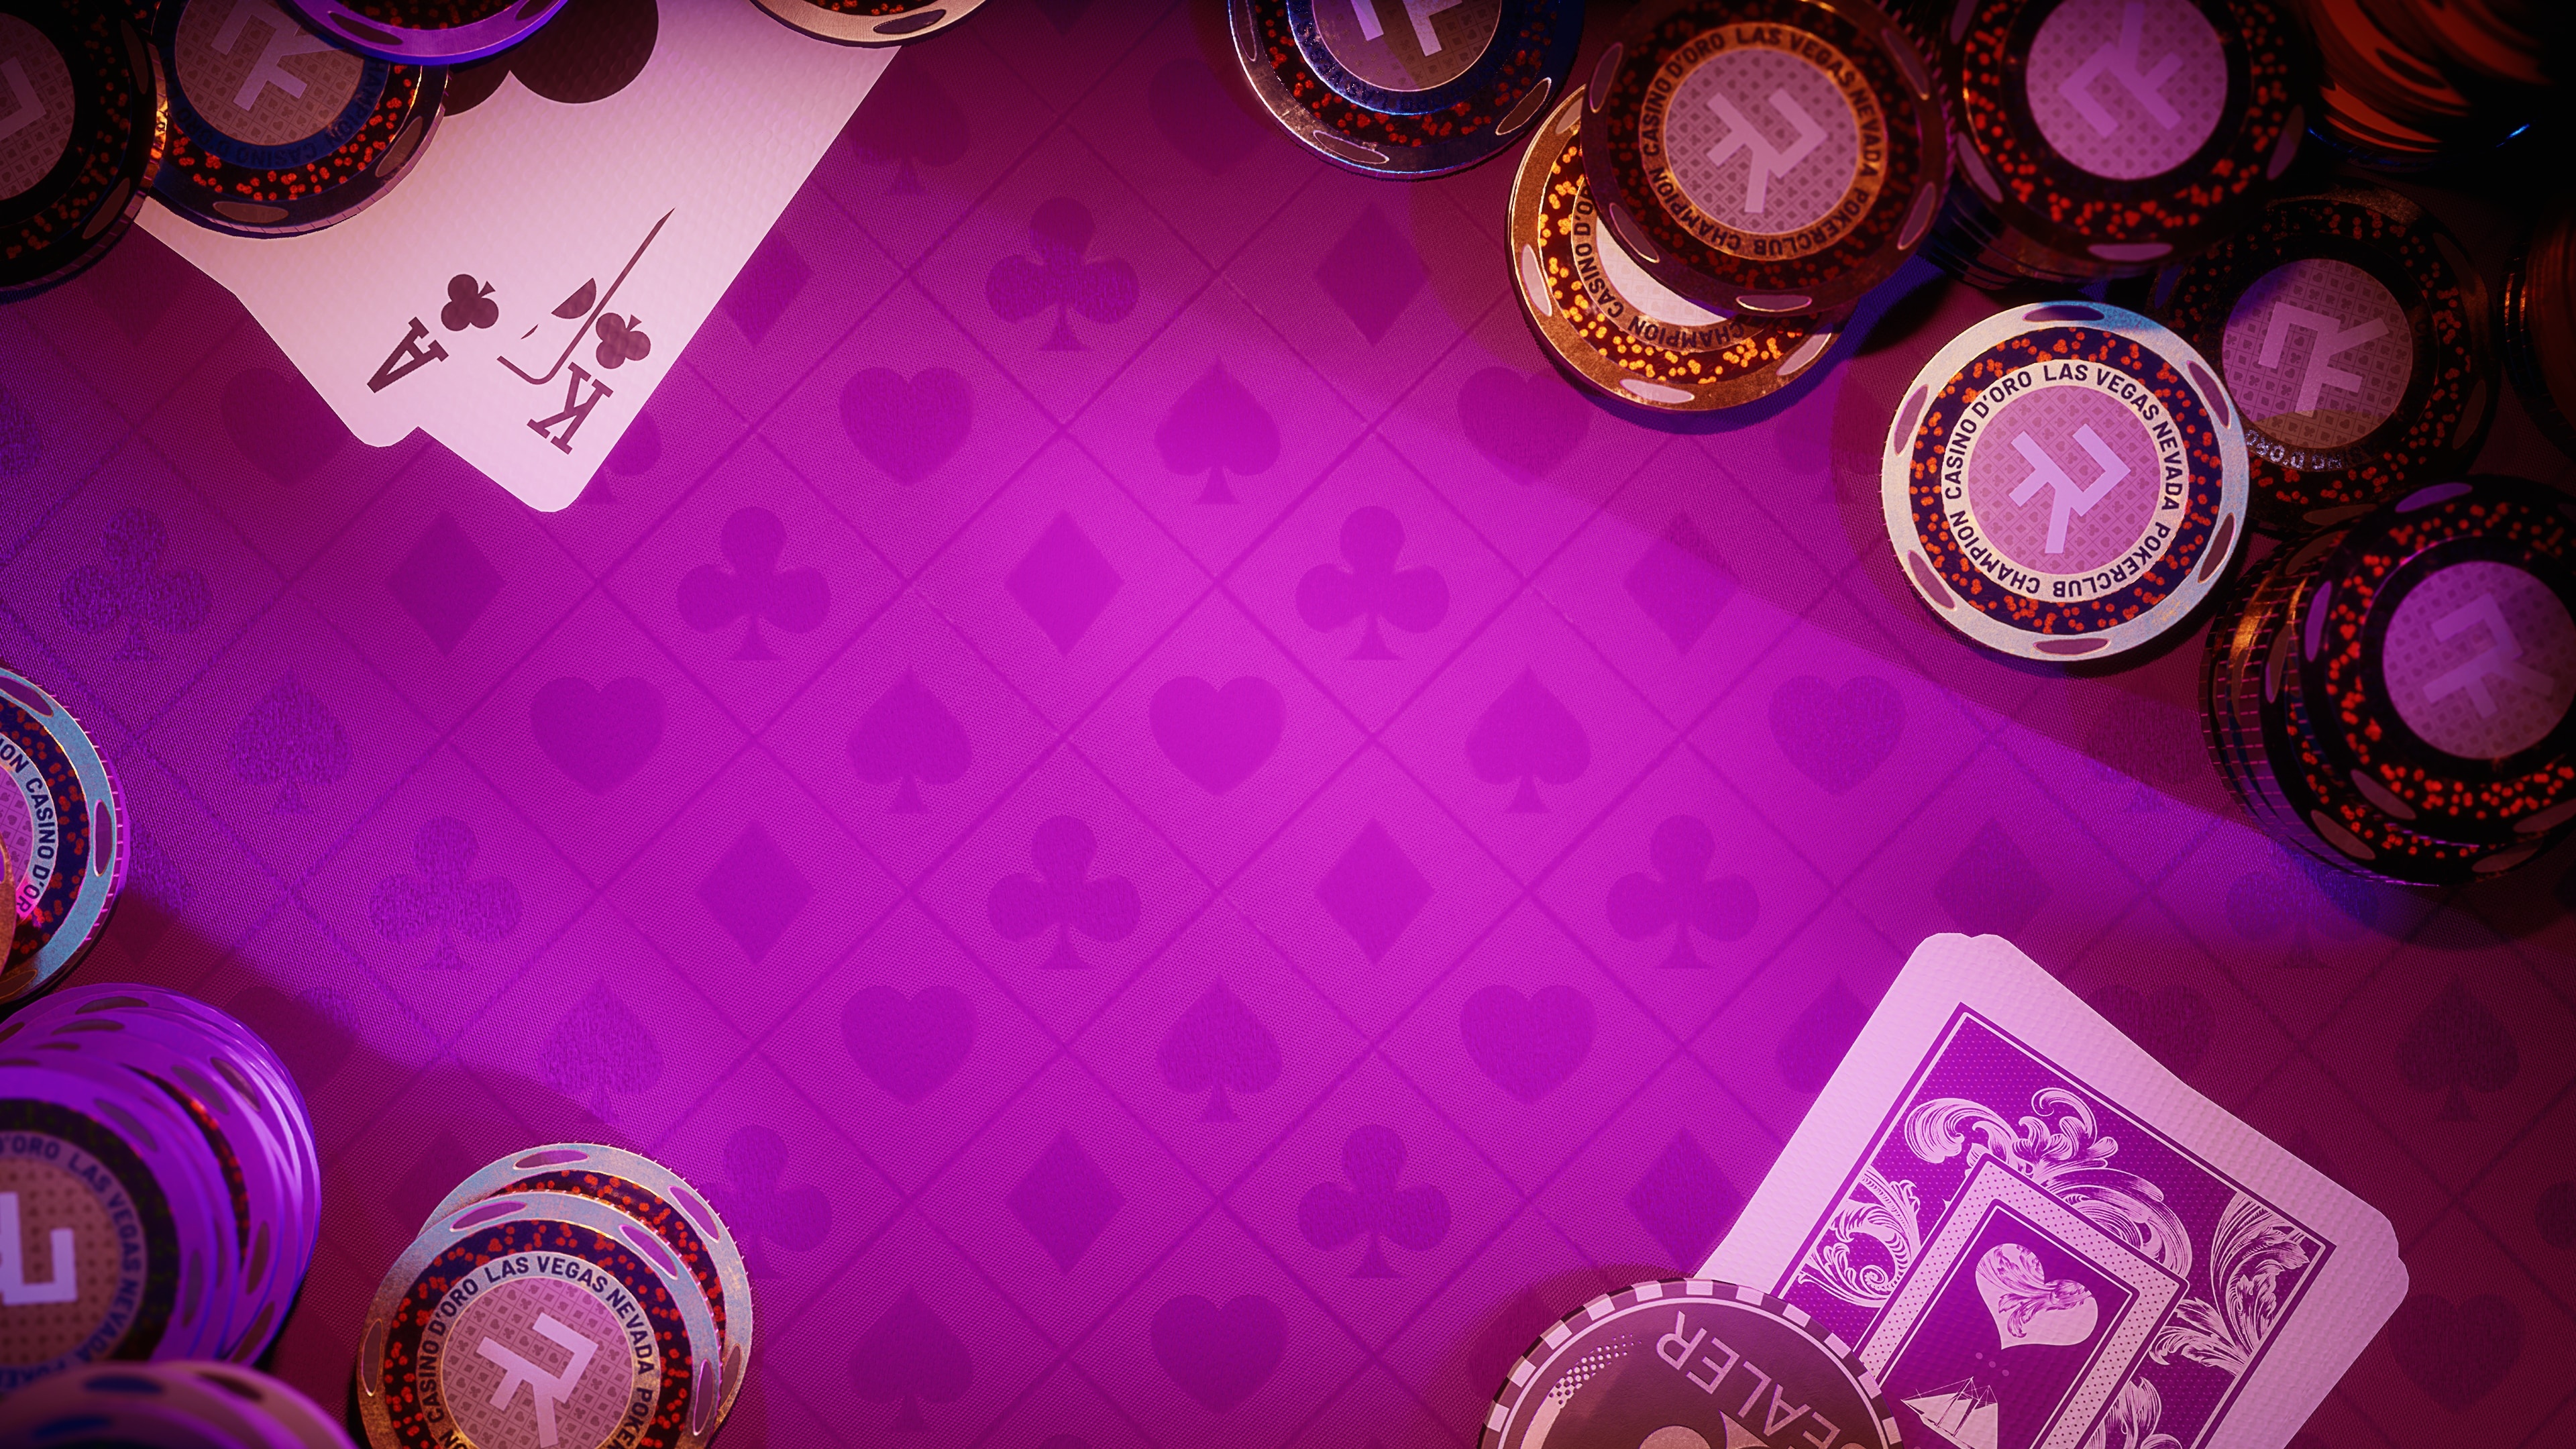 Poker: Poker Club PS4, Games, Adrenaline, Excitement, Table. 3840x2160 4K Background.